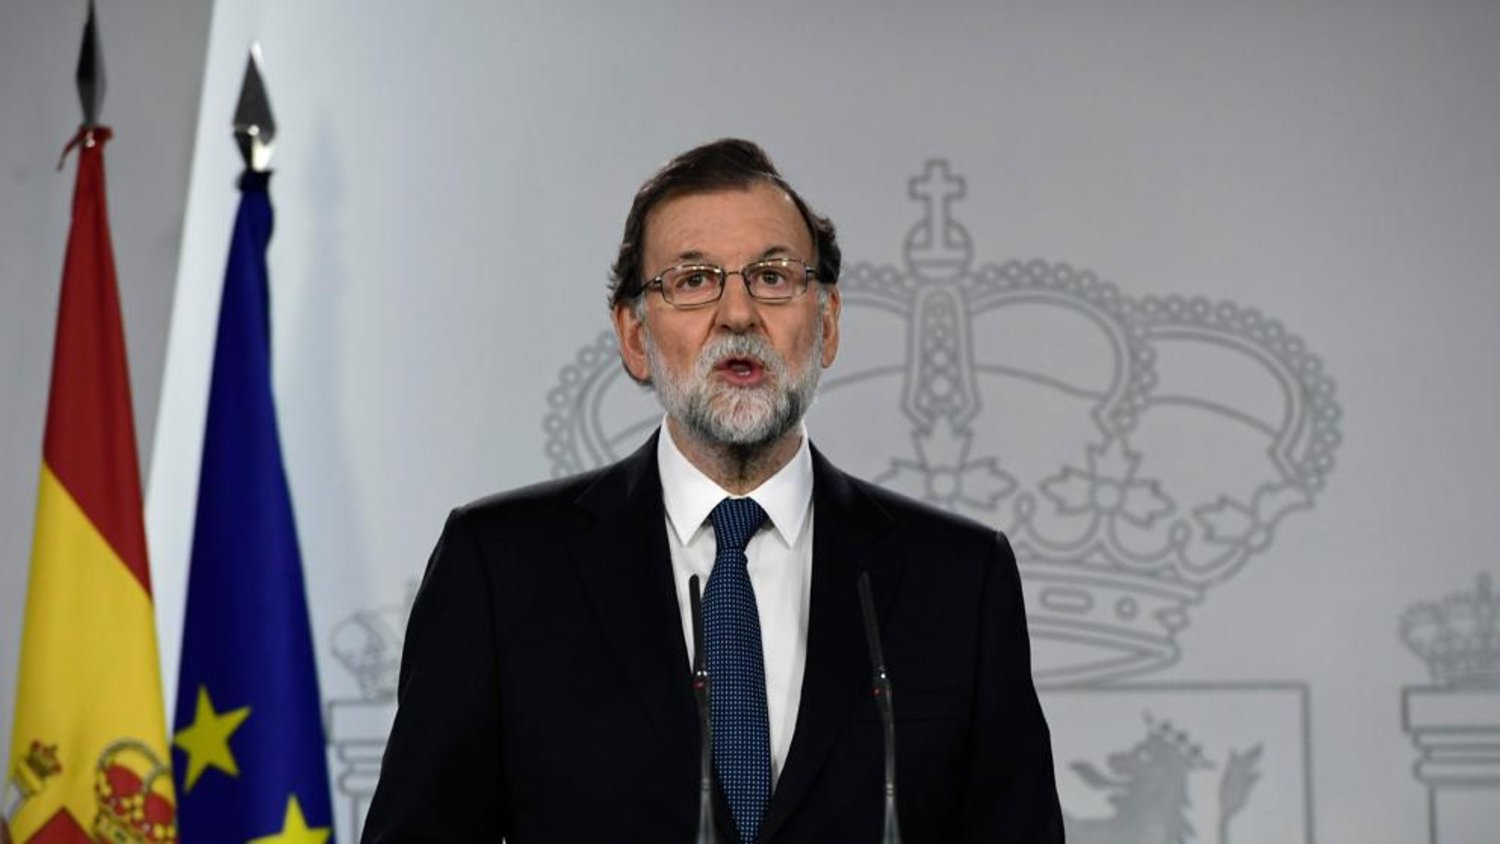 Spanish Prime Minister Mariano Rajoy. (AFP)